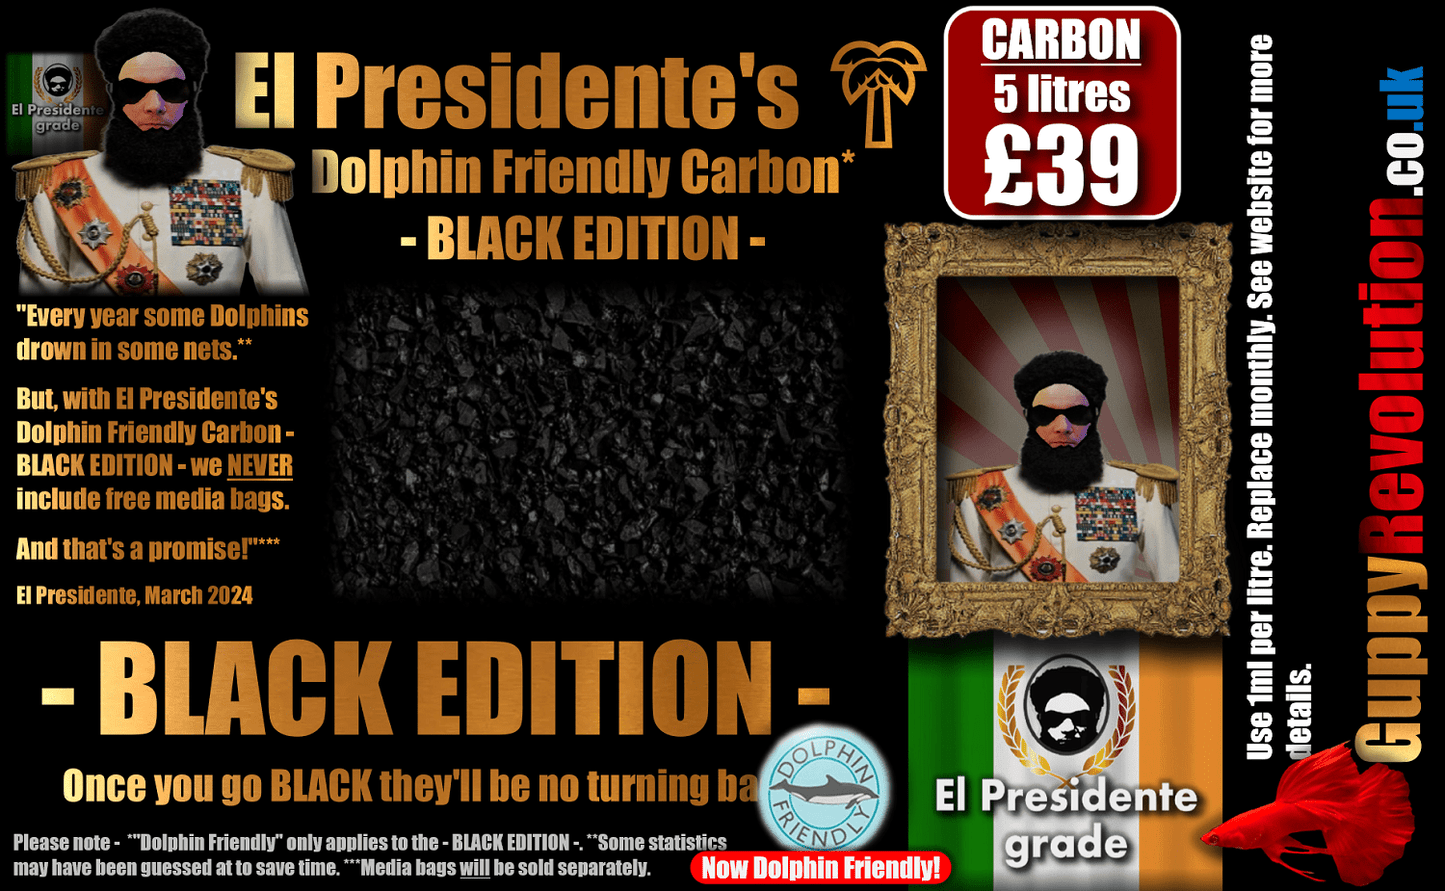 Presidente's Dolphin Friendly Carbon - BLACK EDITION - 5 Litres SALE PRICE: £39. - Suitable for freshwater & marine.